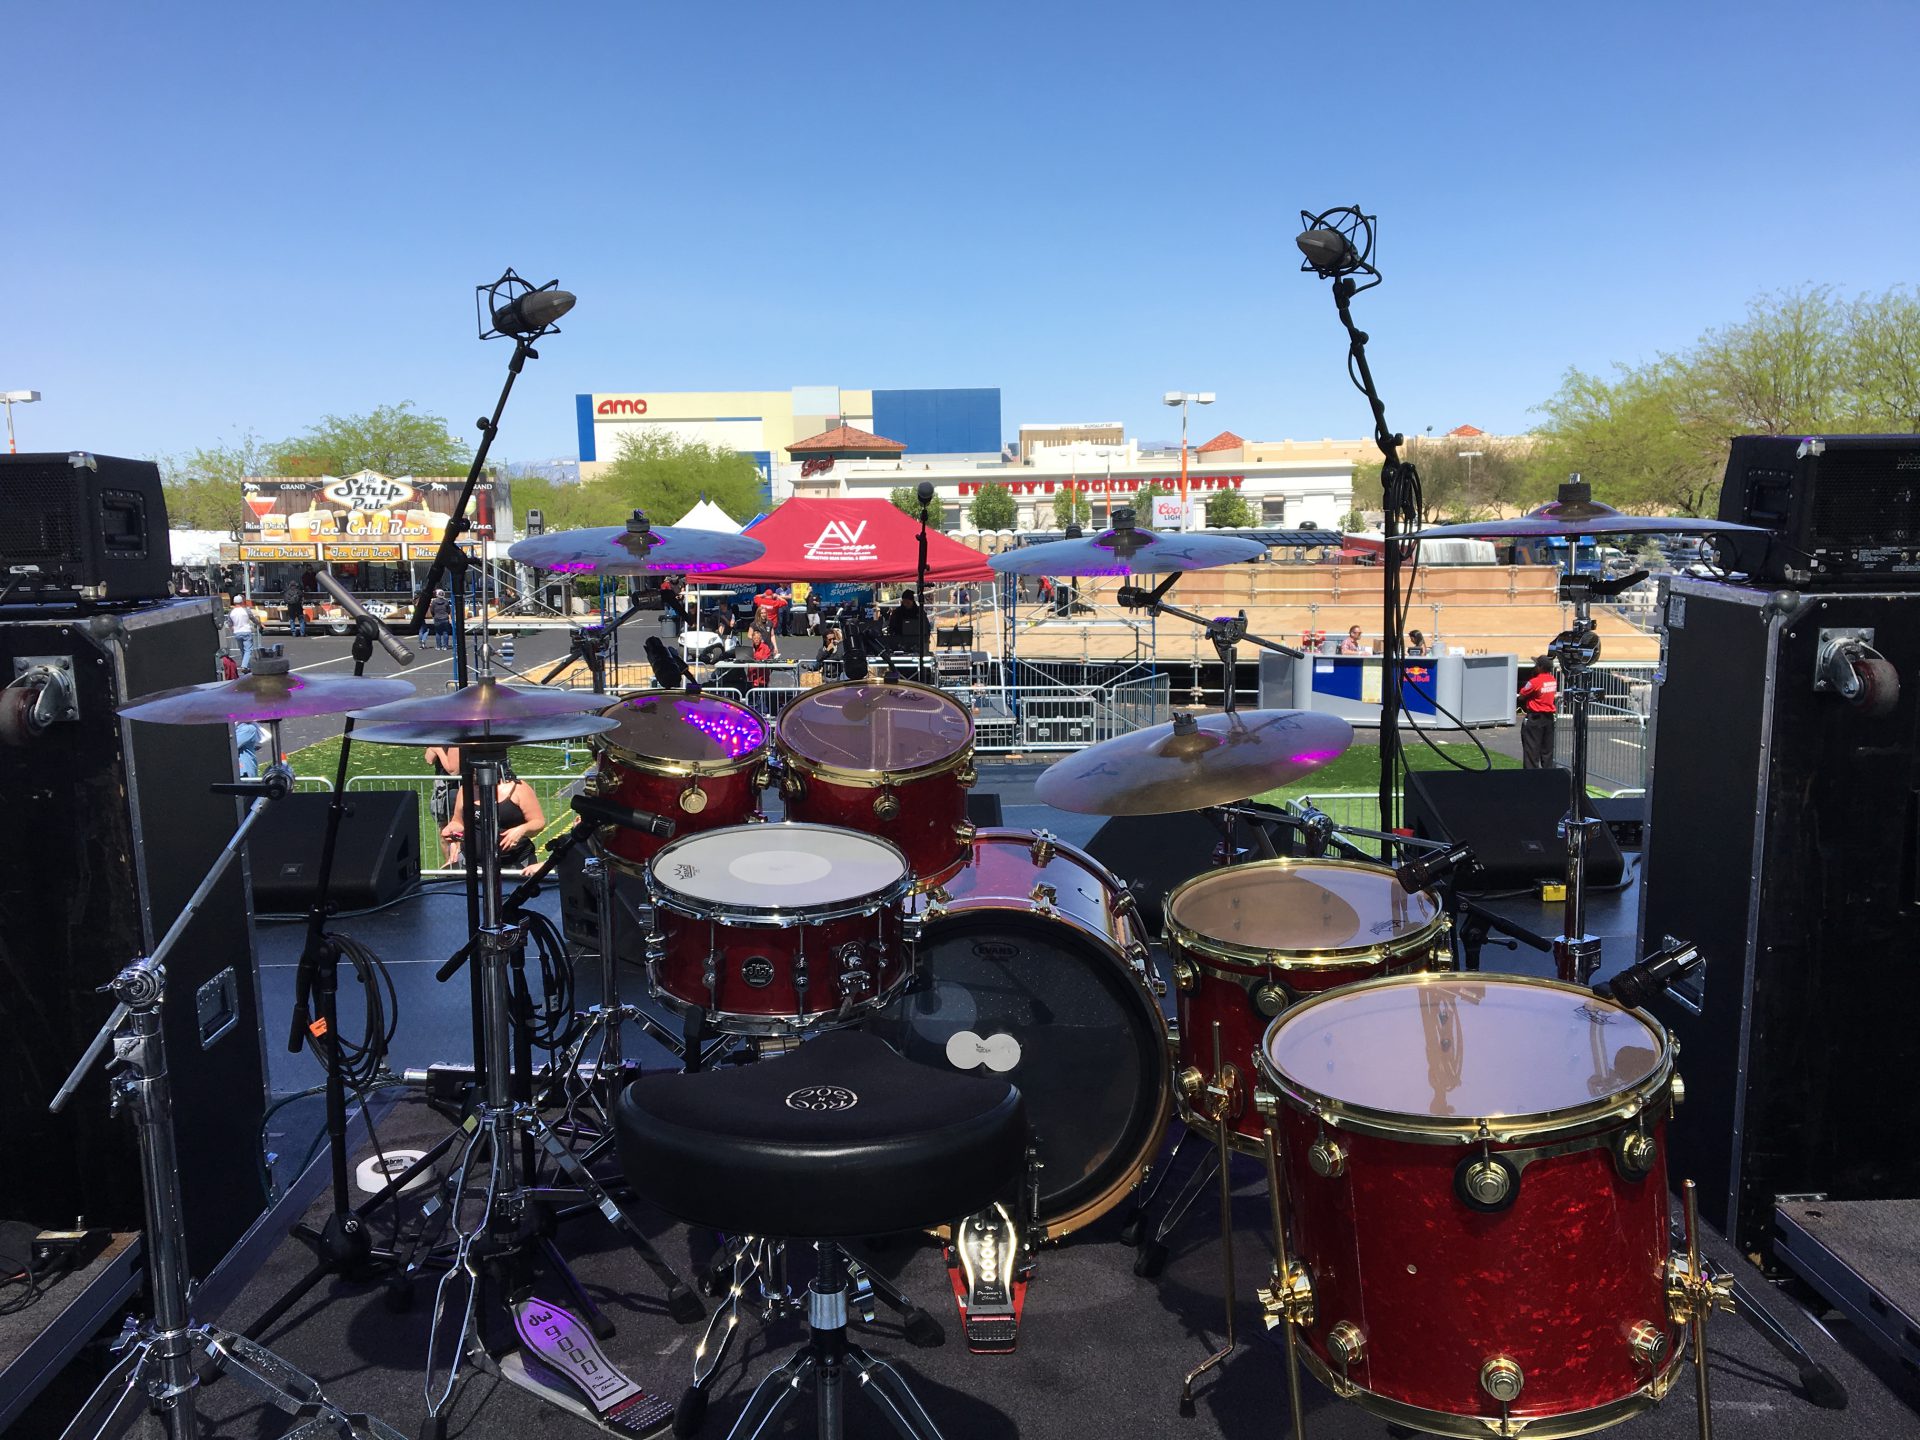 Drum kit Stoney's Rockin' Country and AV Vegas Rock the ACM Tailgate for a Cause Concert